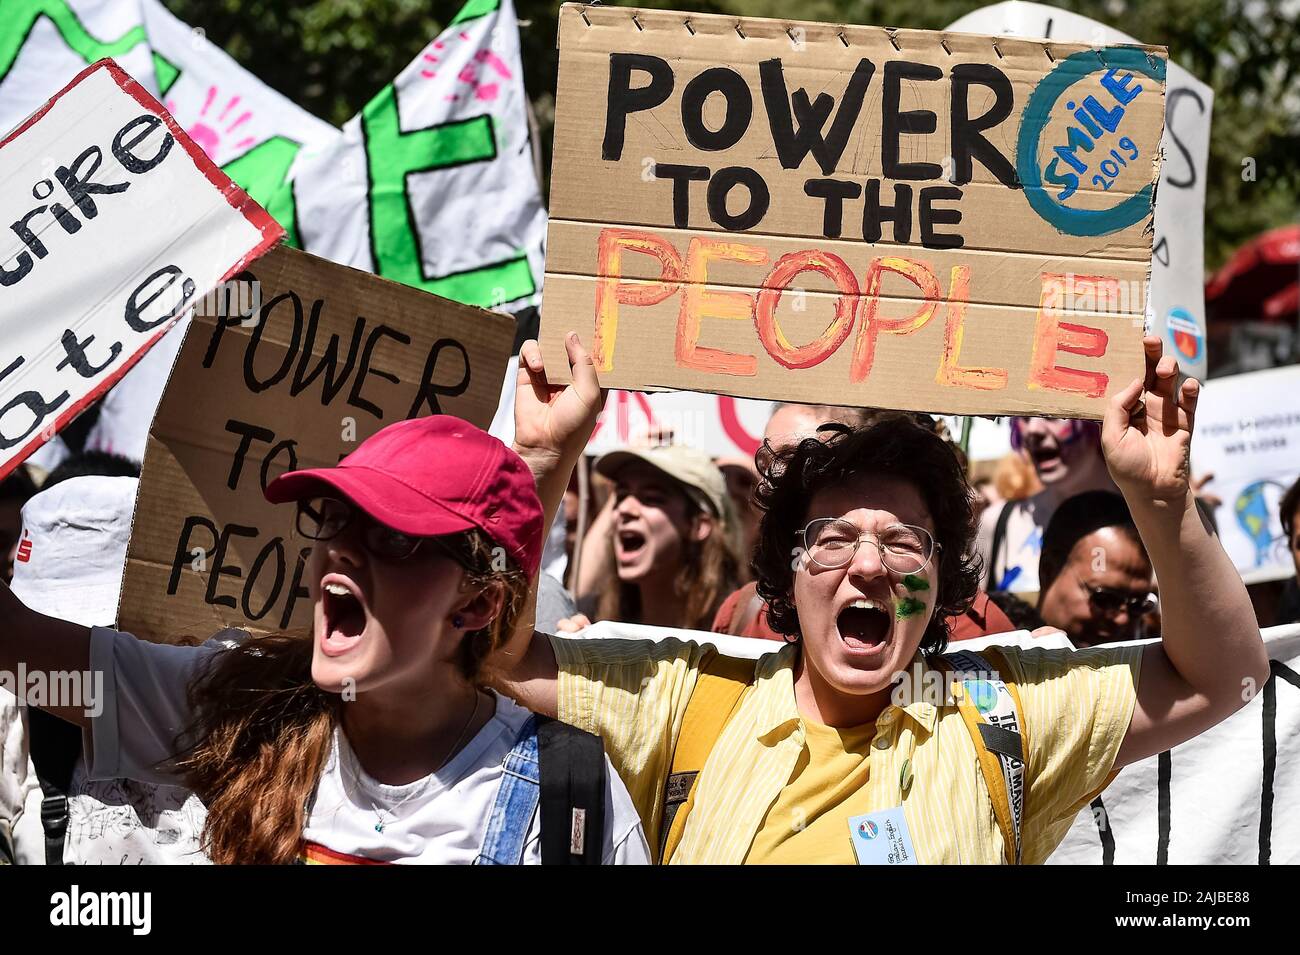 Lausanne, Switzerland - 09 August, 2019: A climate activist holds a sign reading 'Power to the people' during a Fridays For Future strike for climate protection that is part of 'SMILE for Future' event. More than 450 young climate activists from different European countries gathered to attend the summit 'SMILE for Future', that stands for Summer Meeting in Lausanne Europe. The aim of the summit is to reinforce the links between the participants of the European Youth Climate Strike movement and to define the future of the mobilisation against climate change. Credit: Nicolò Campo/Alamy Live News Stock Photo